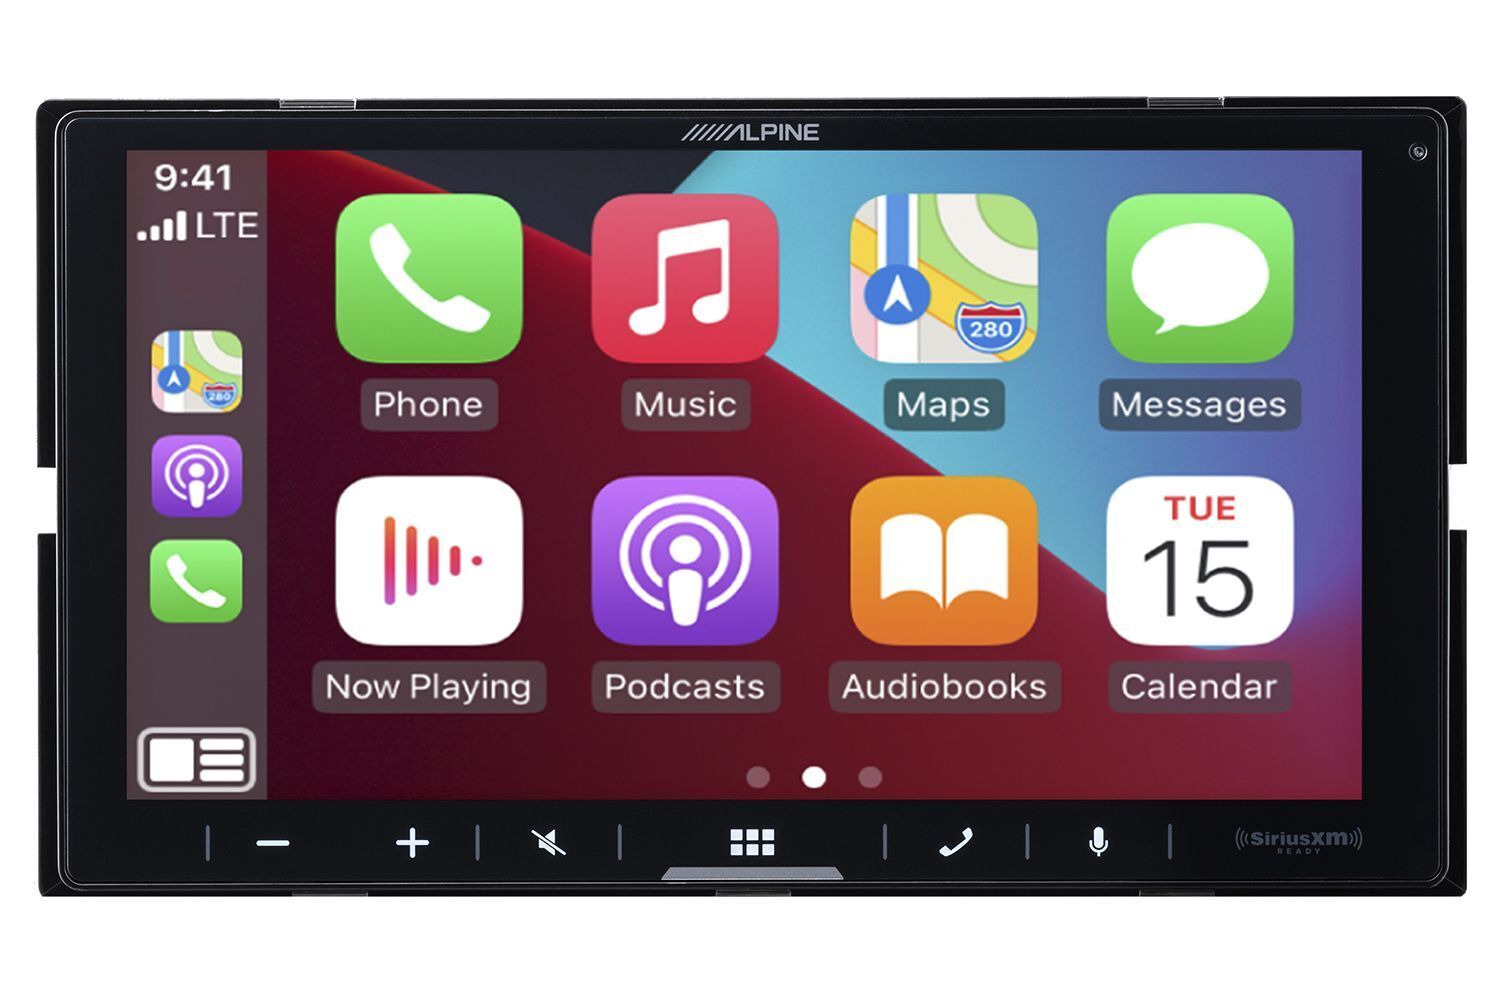 Alpine iLX-W670 Receiver with Apple CarPlay, Android Auto Includes KTA-450 4-Channel Amplifier, Back up Camera and License Plate Fame